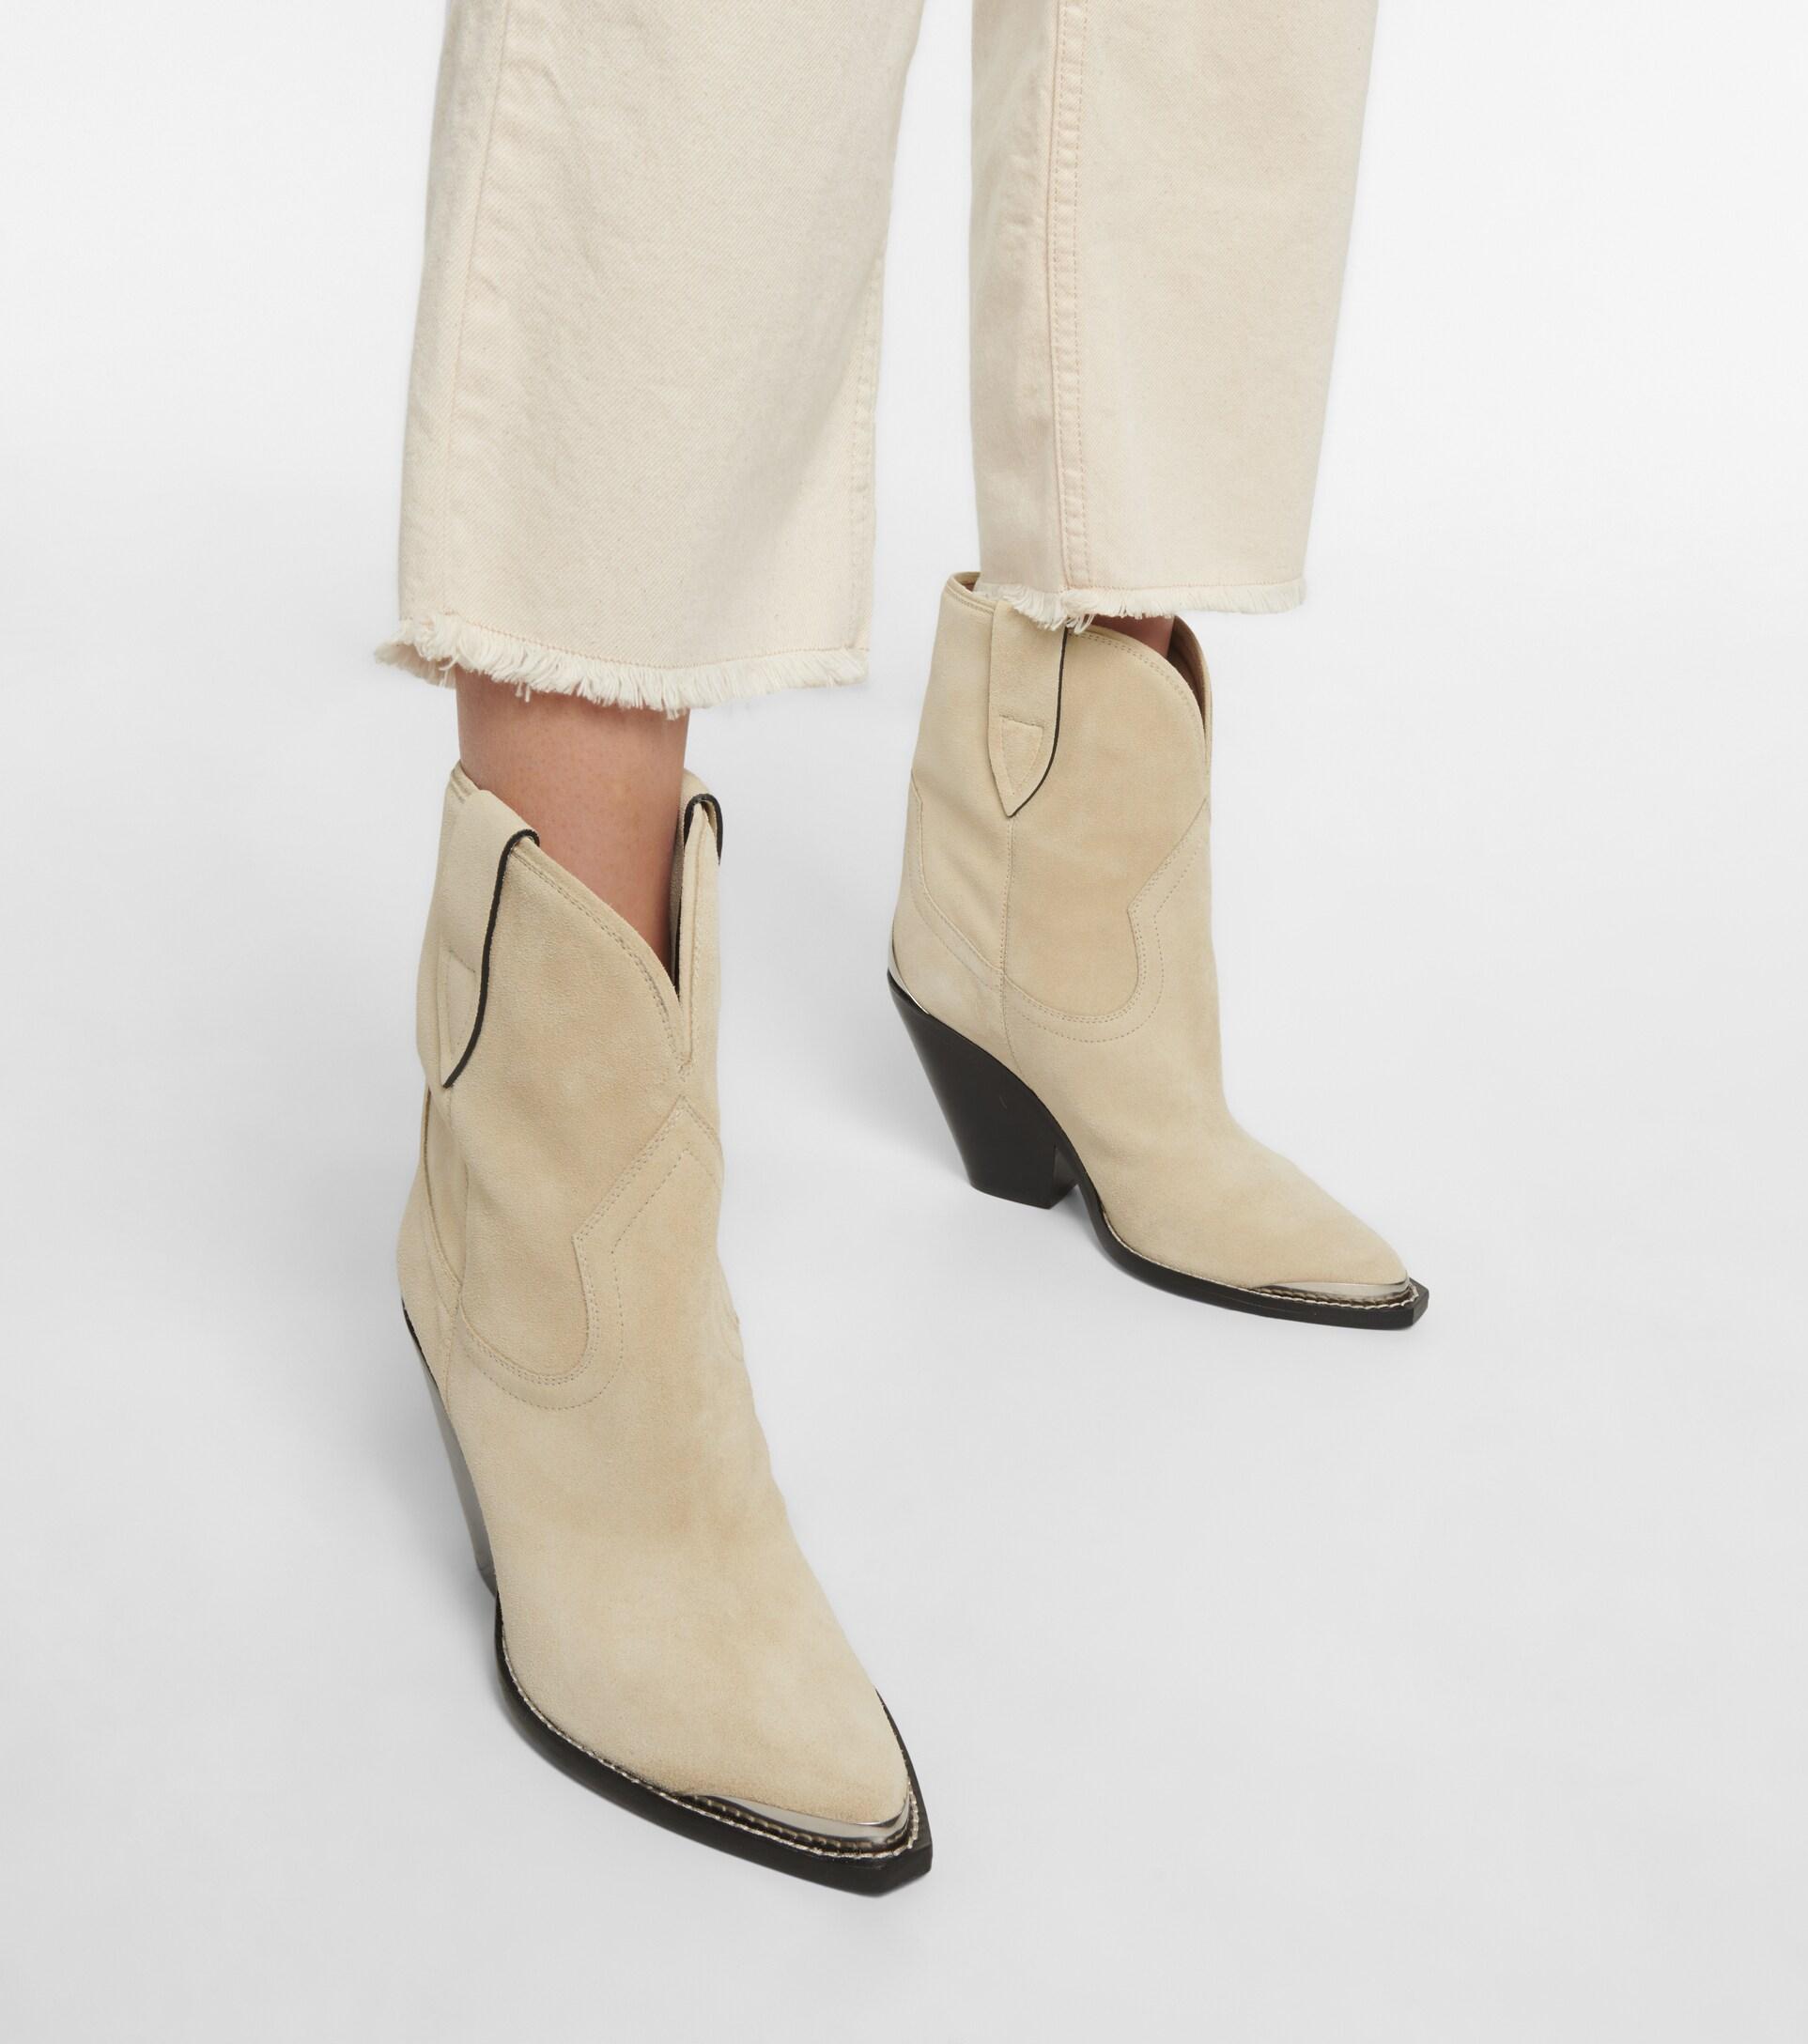 Isabel Marant Leyane Suede Ankle Boots in Natural | Lyst